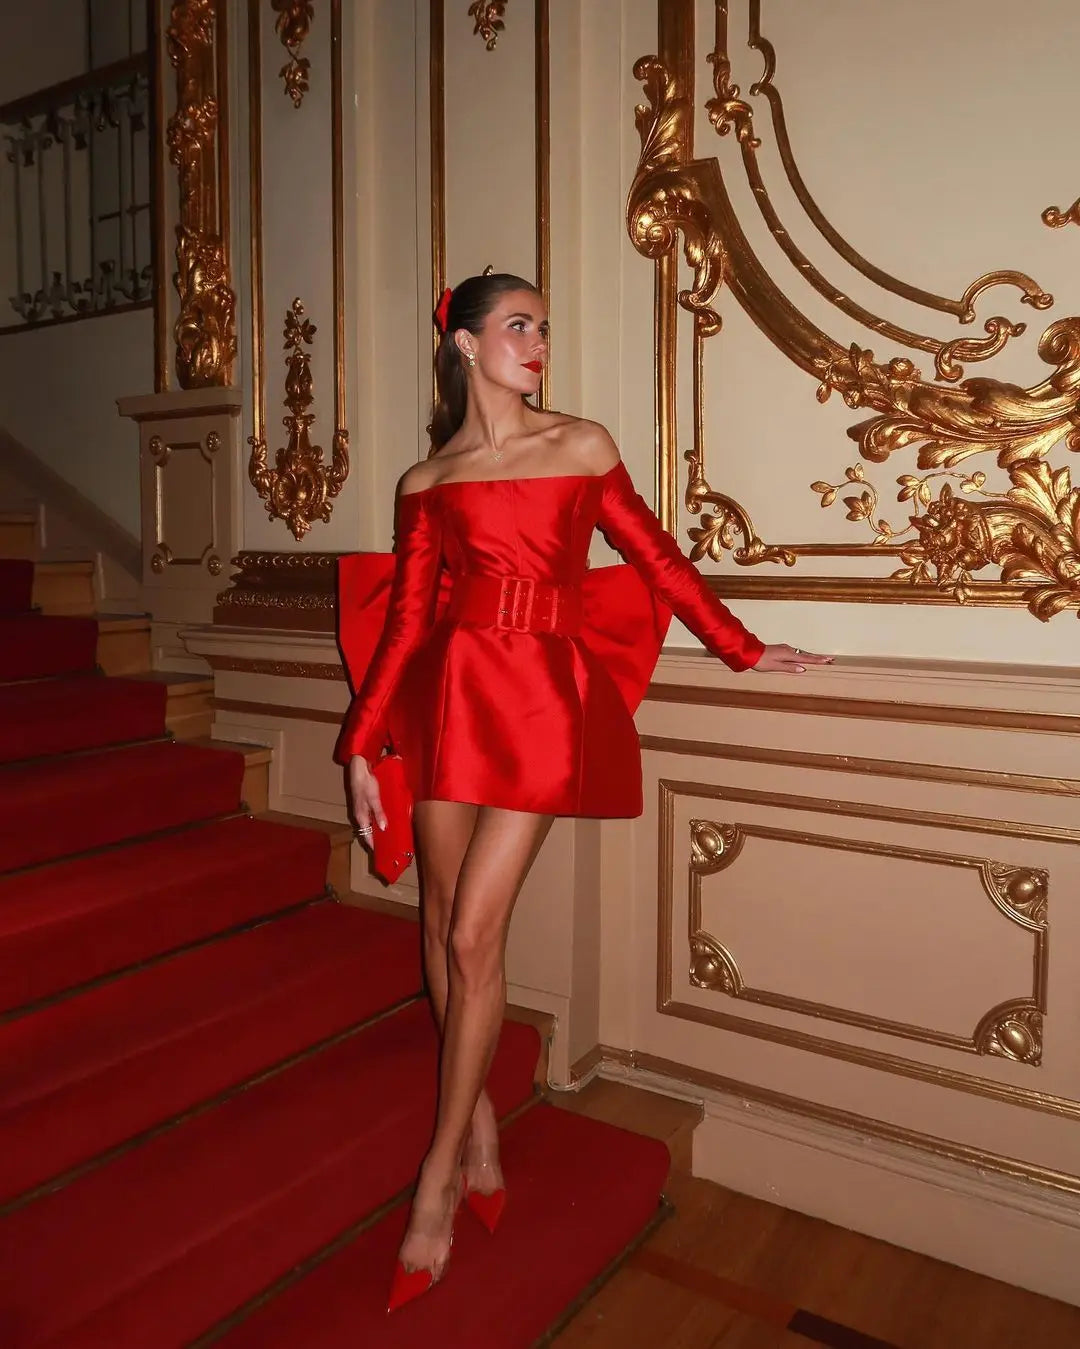 Stylish Red Mini Prom Dresses with Big Bow Off the Shoulder Long Sleeves Satin Short Birthday Party Dresses فساتين سهرة Custom